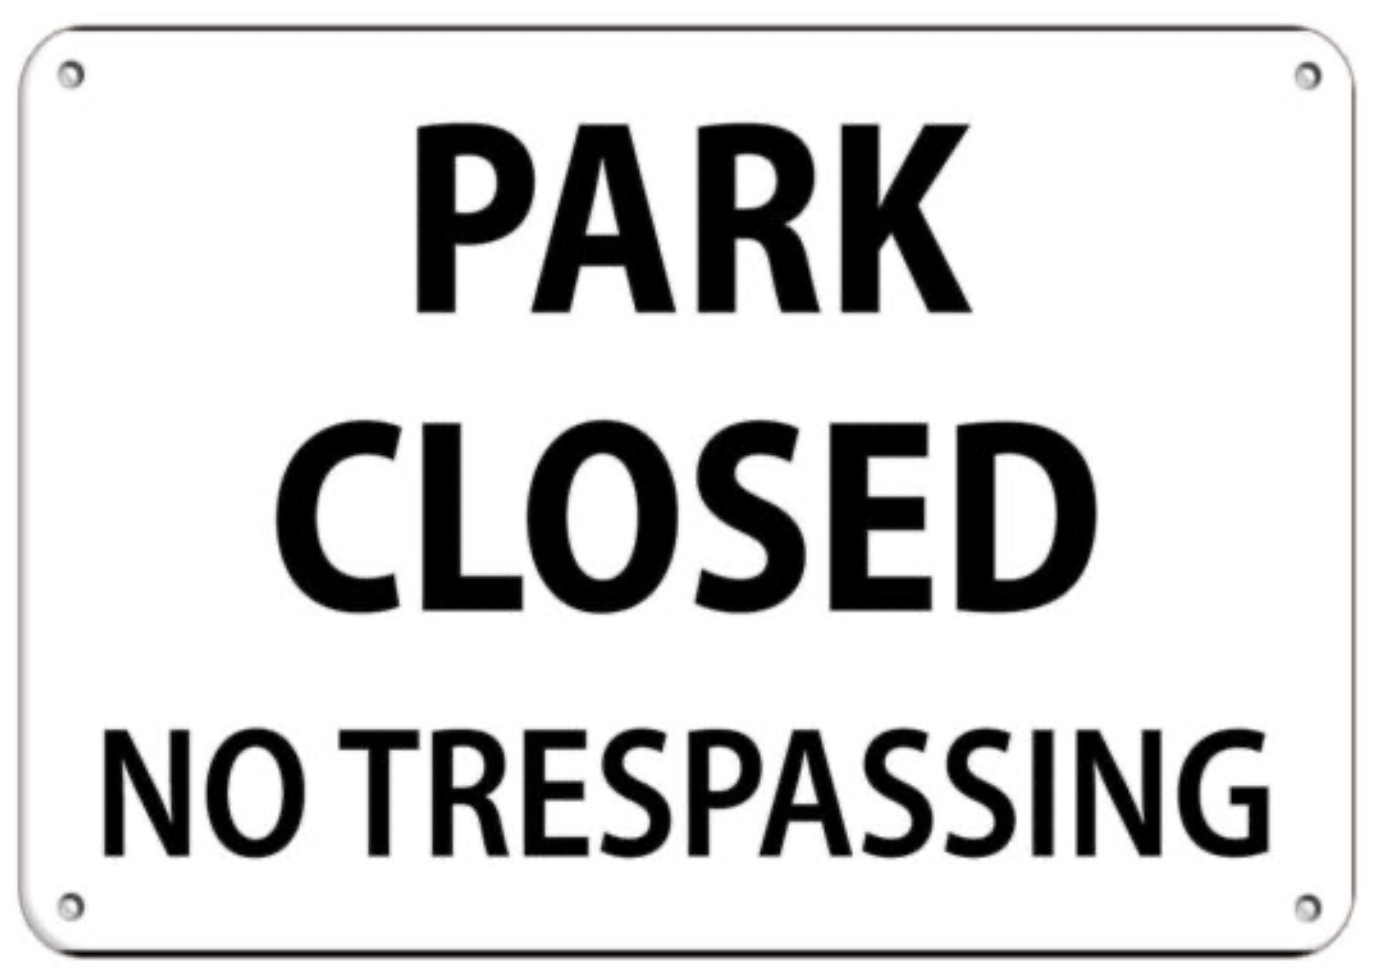 Closed parking. No closed.